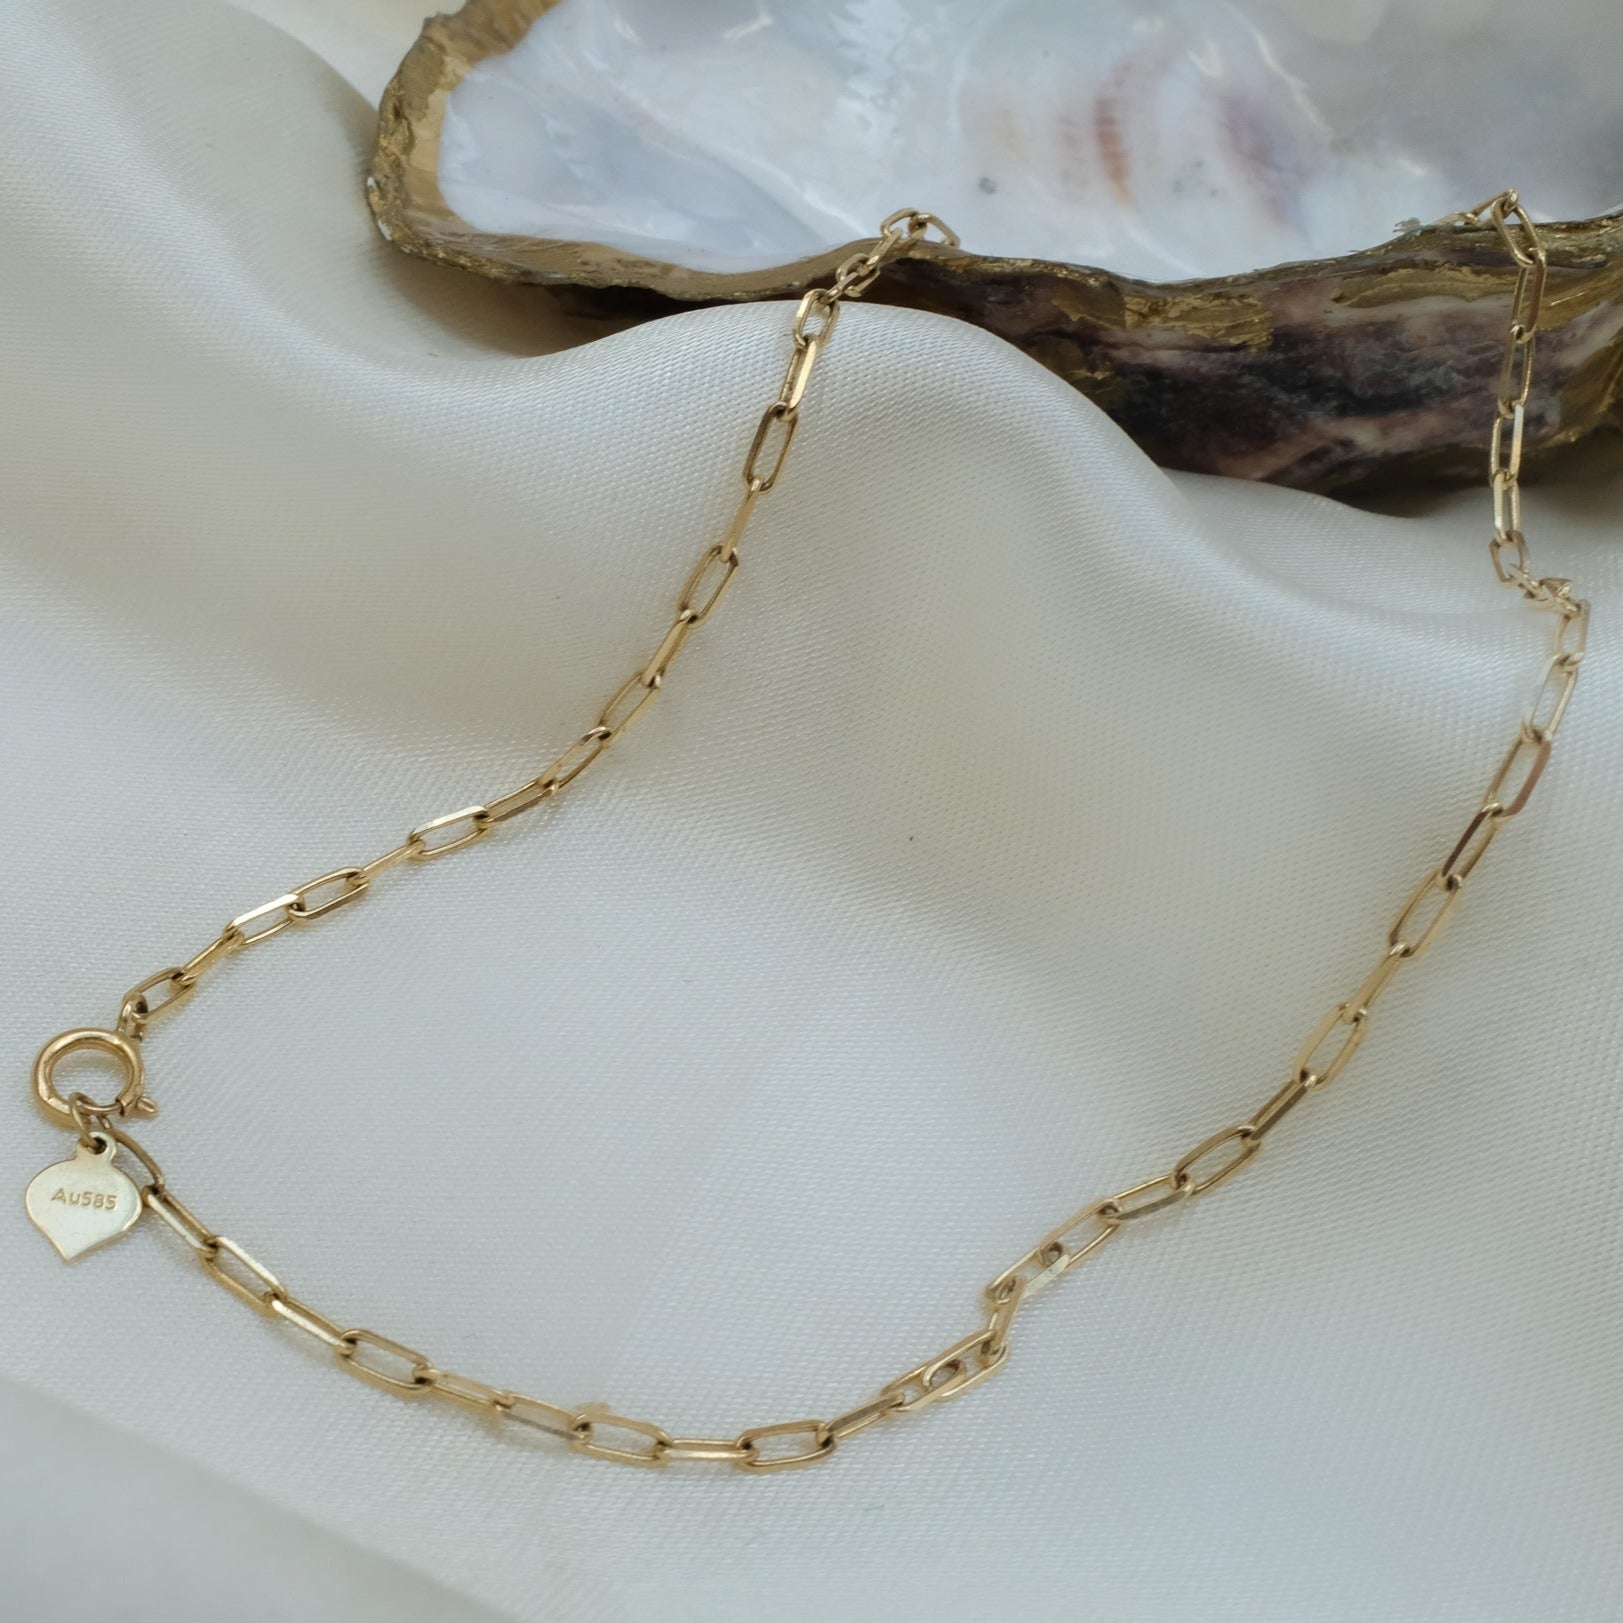 Brixton Chain Anklet - 14k Solid Gold